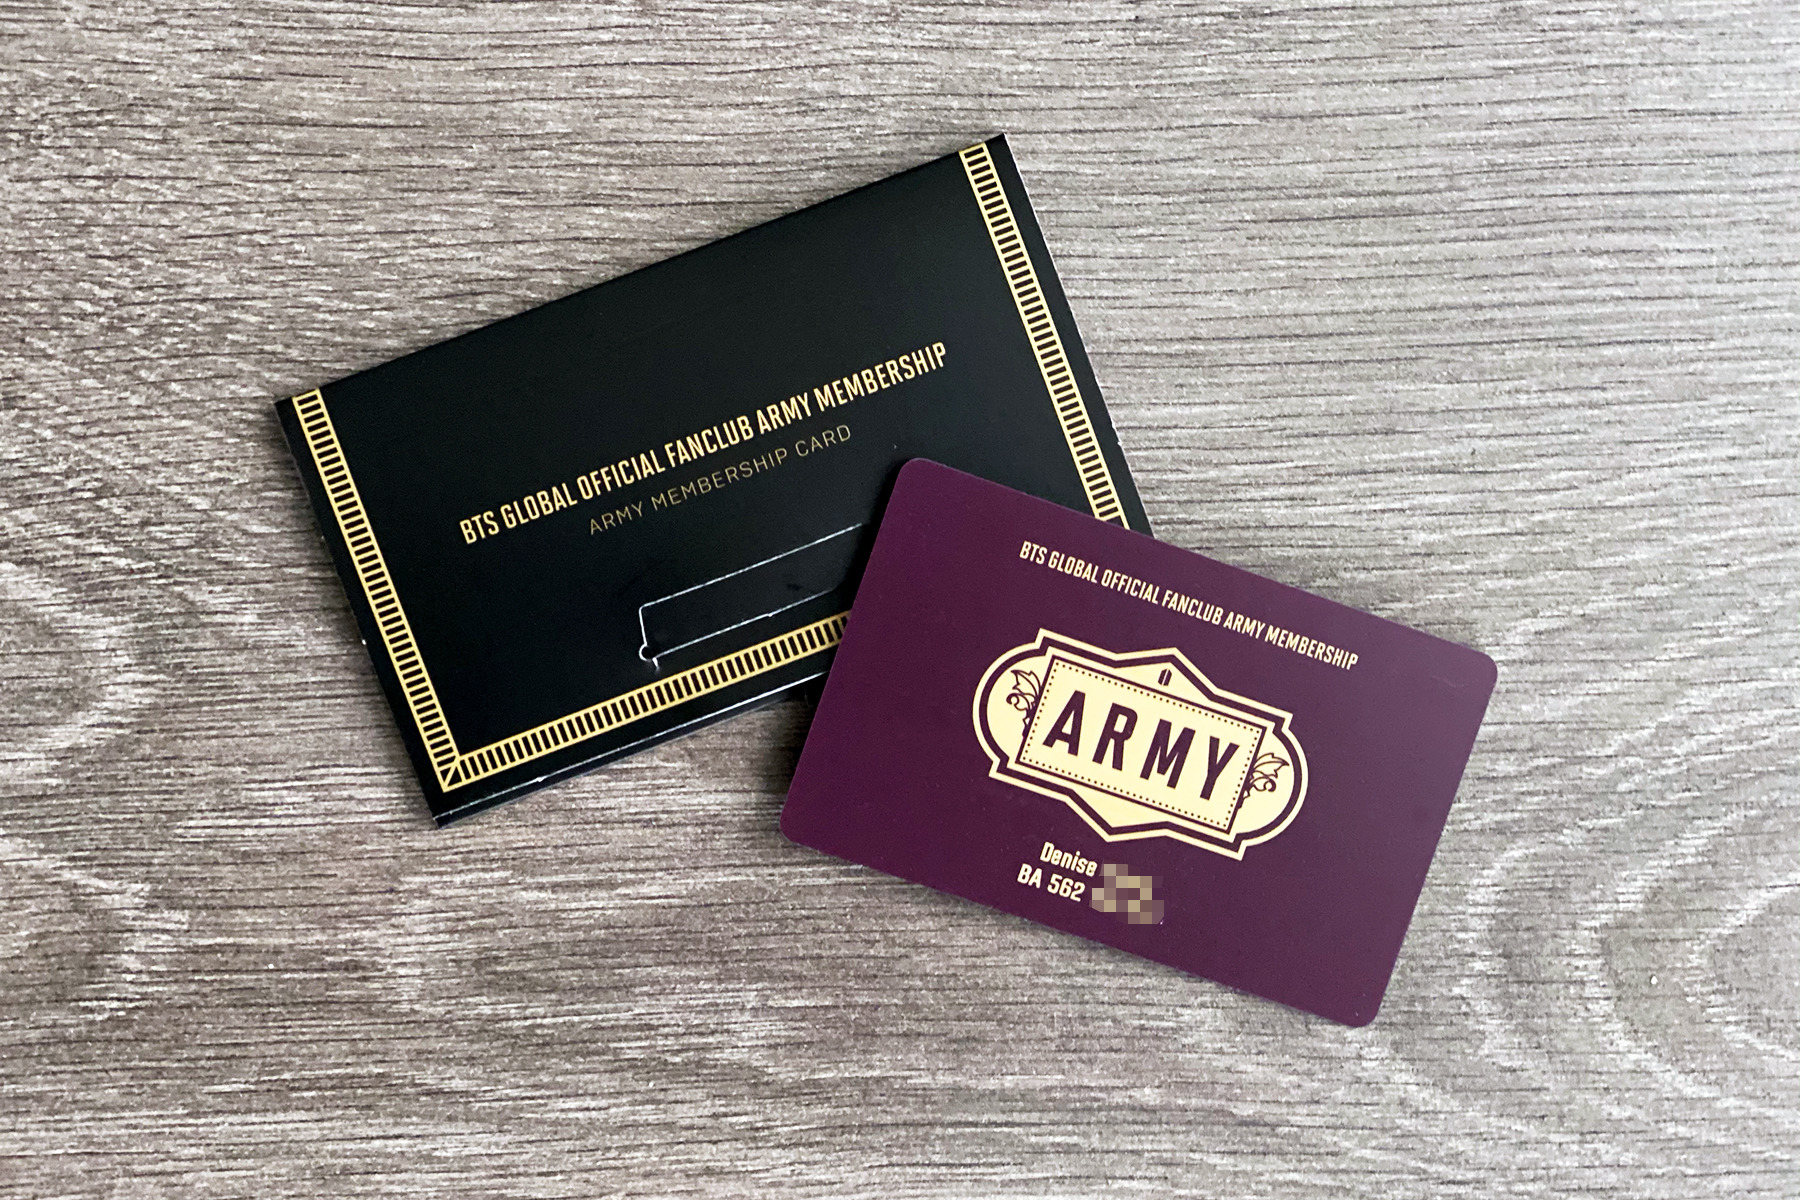 BTS Fan Card: The Ultimate Guide to Collecting, Customizing, and Connecting with the BTS Army